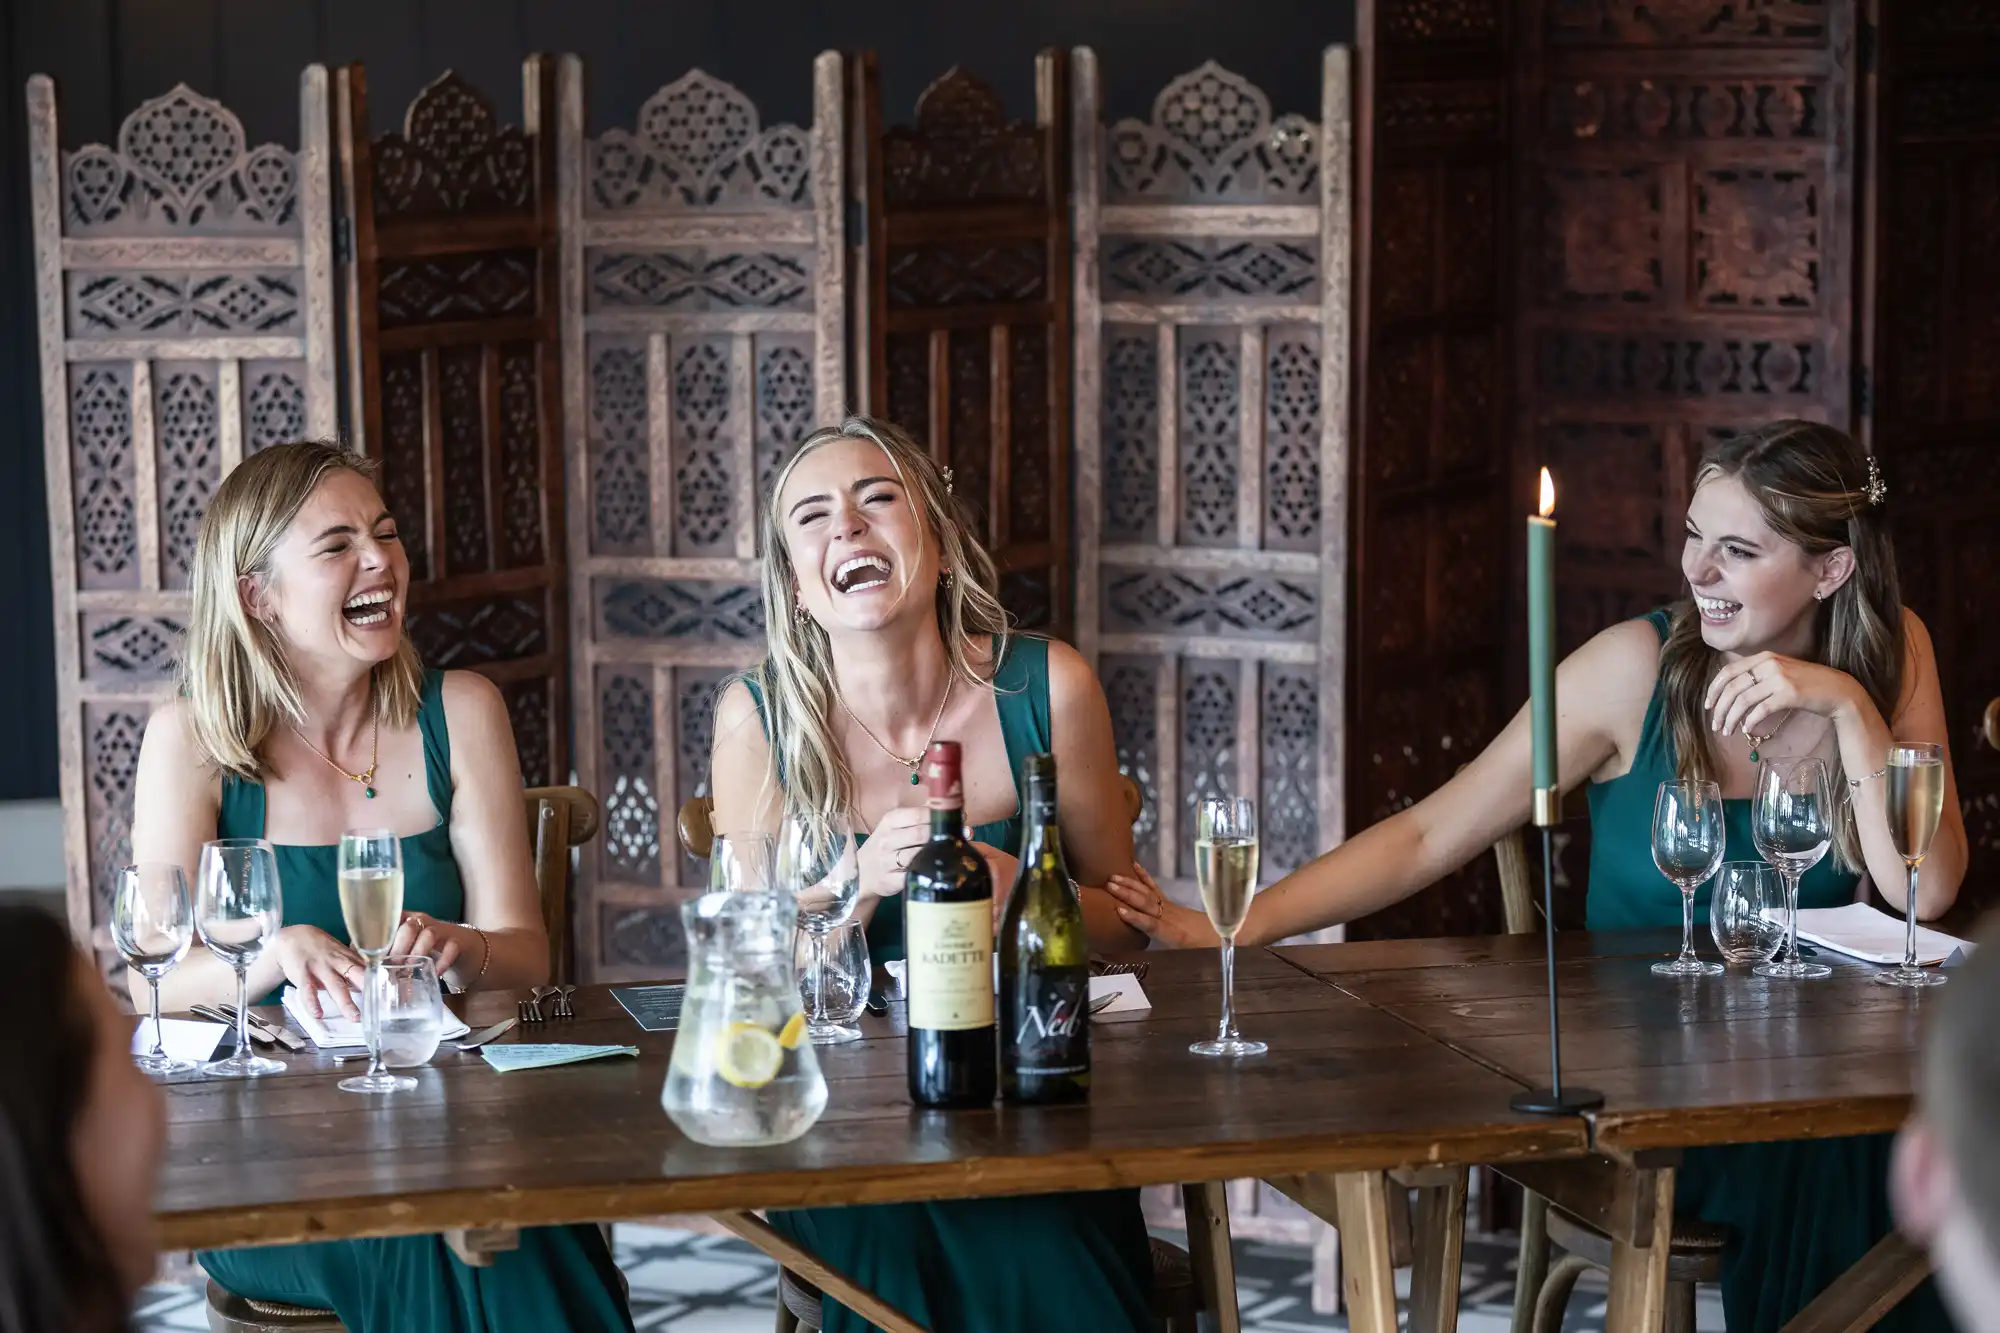 Three women in green dresses are laughing together at a wooden table set with wine, water, and glasses. A candle burns on the table, and decorative wooden panels are in the background.